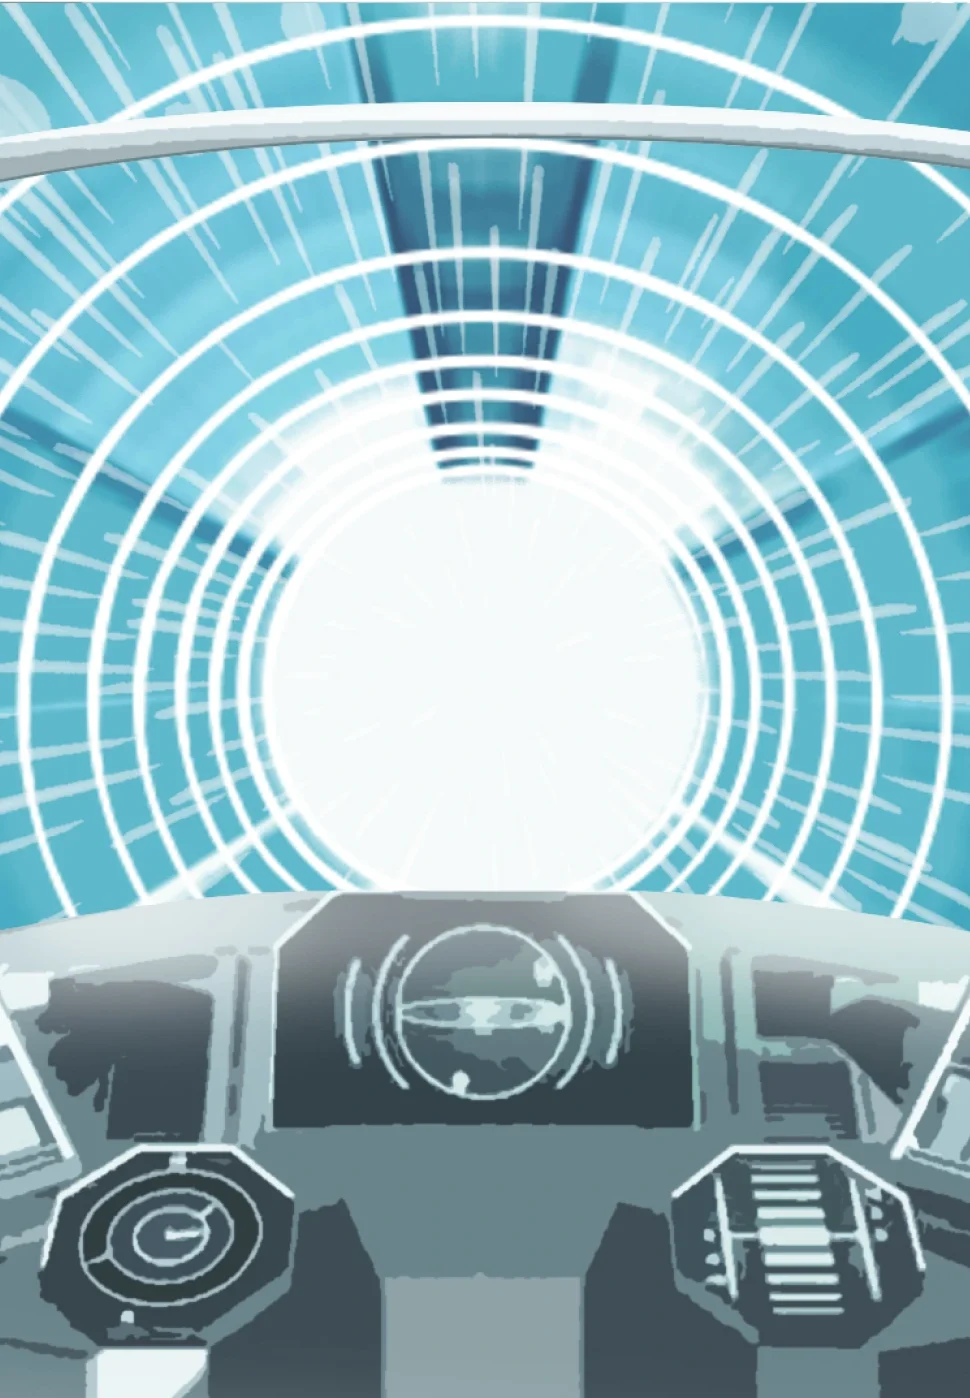 Initial design idea for the inside dashboard of the pod vehicle, shown driving forward into a blue tunnel.